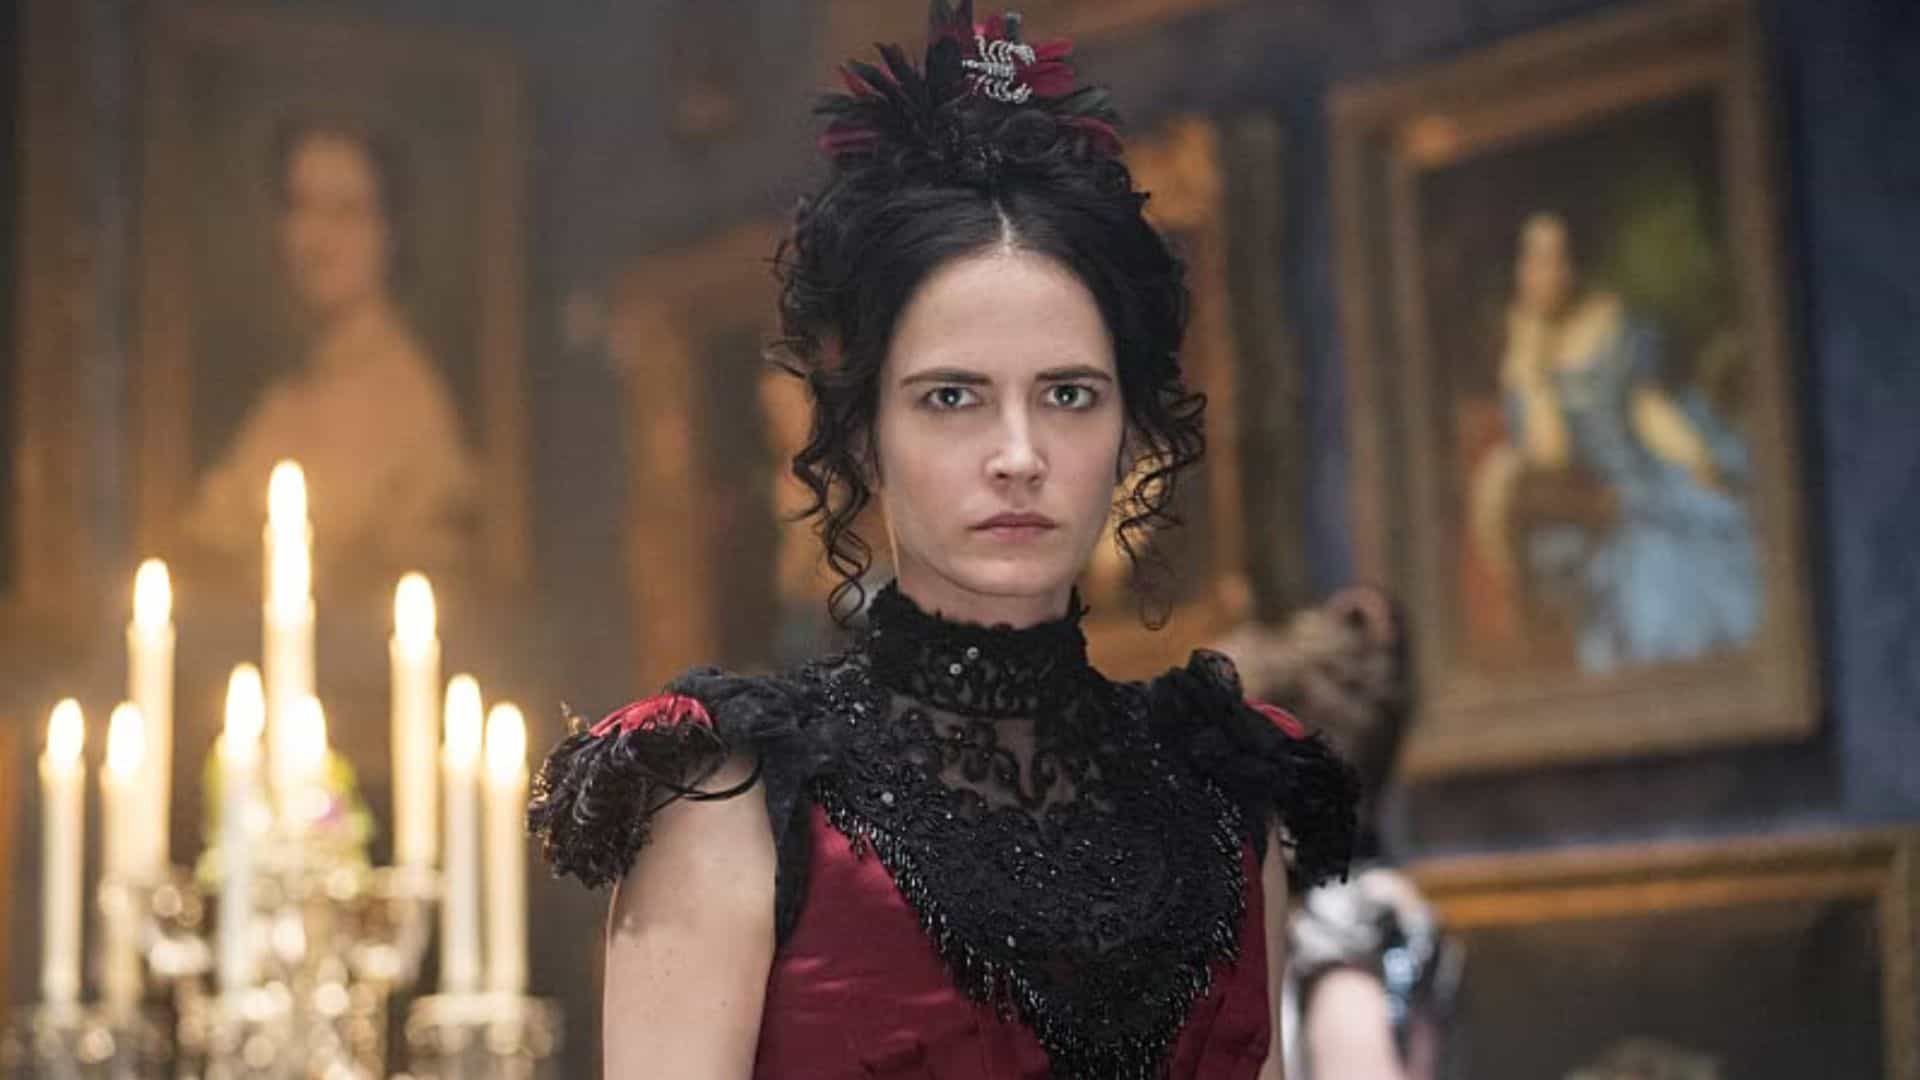 Vanessa Ives staring intensely in a red dress in this image from Paramount Plus 